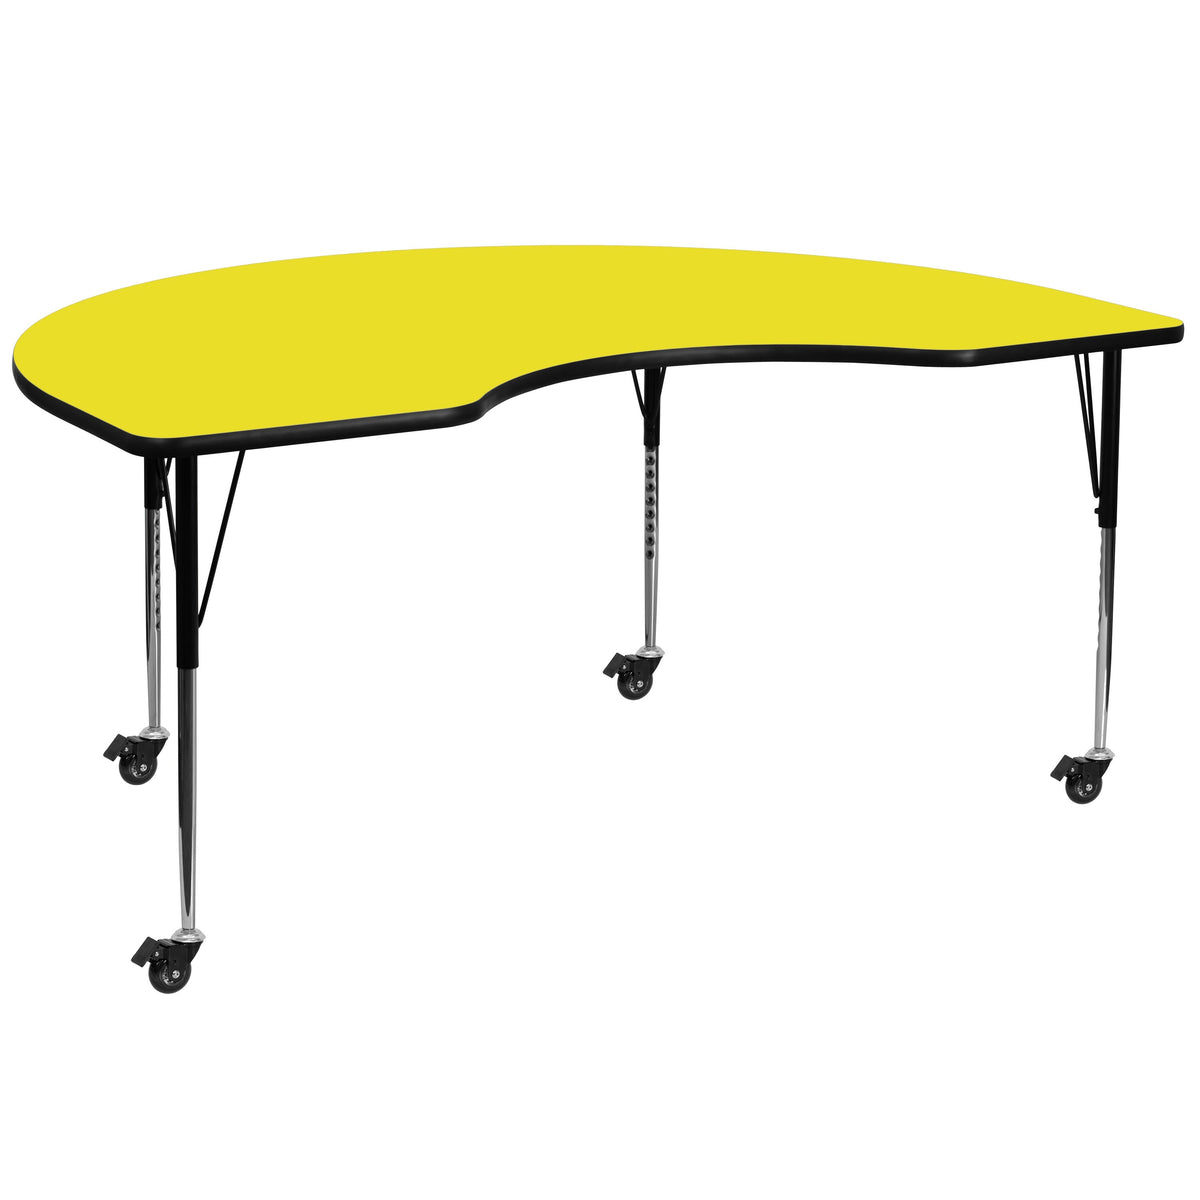 Yellow |#| Mobile 48inchW x 72inchL Kidney Yellow HP Laminate Adjustable Activity Table